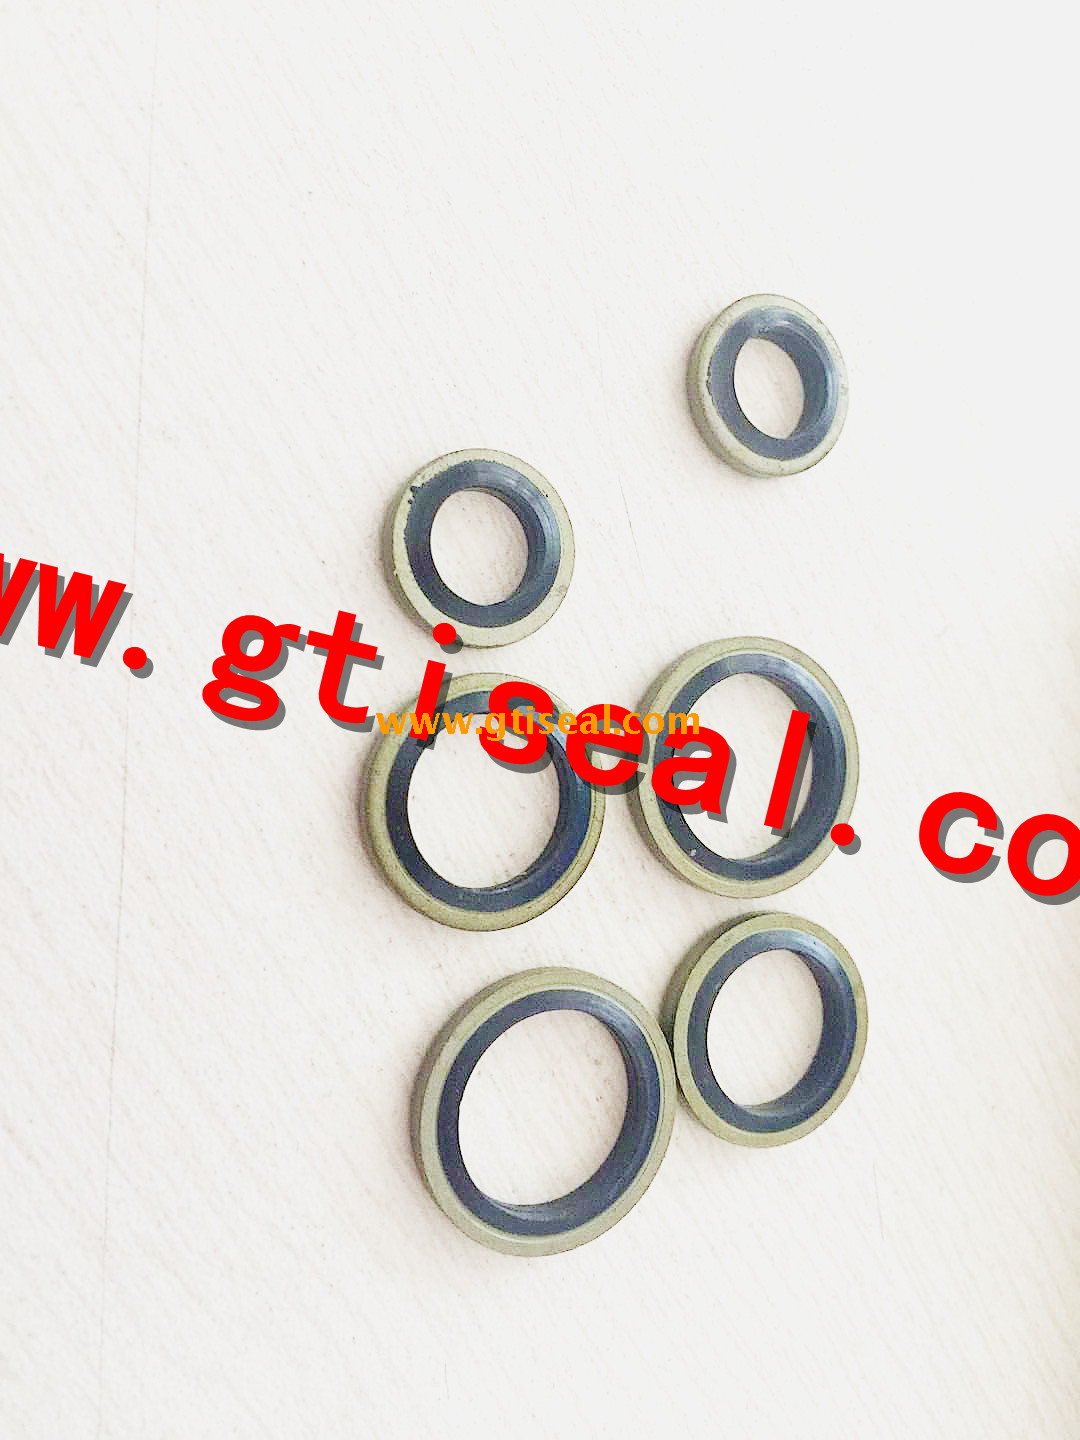 Bonded washer/Bonded gasket for auto products